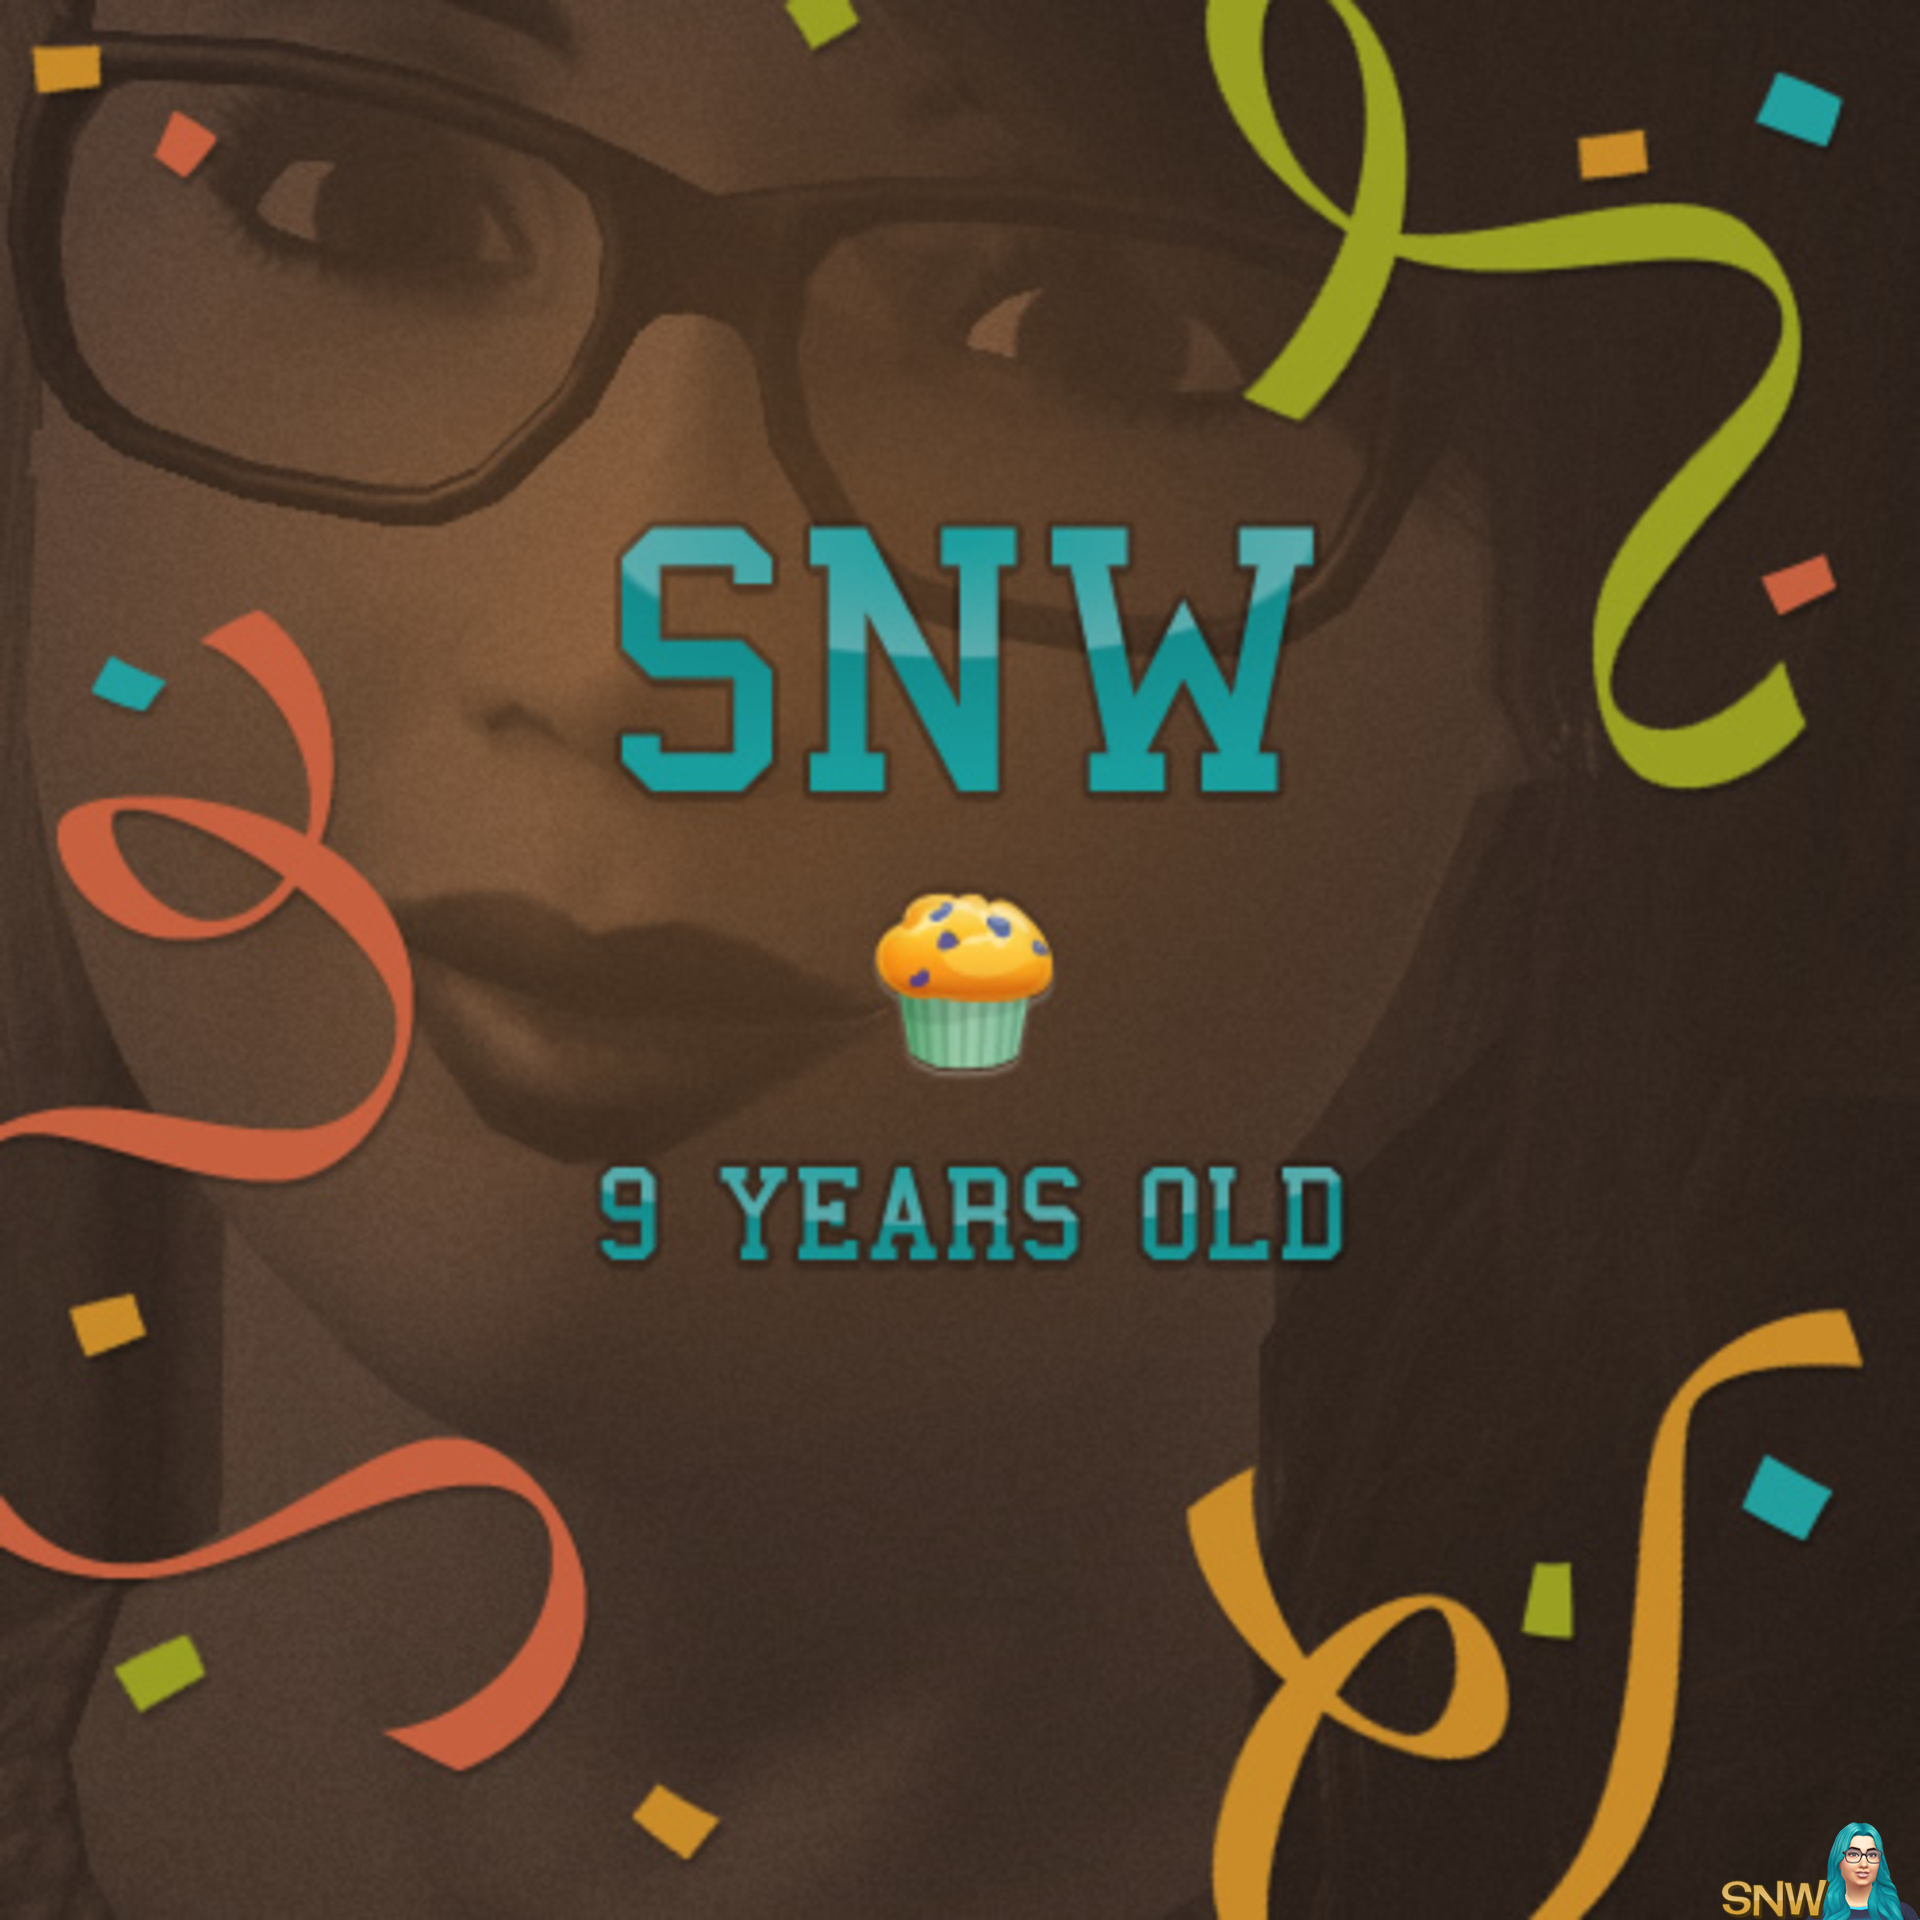 SNW is 9 years old!